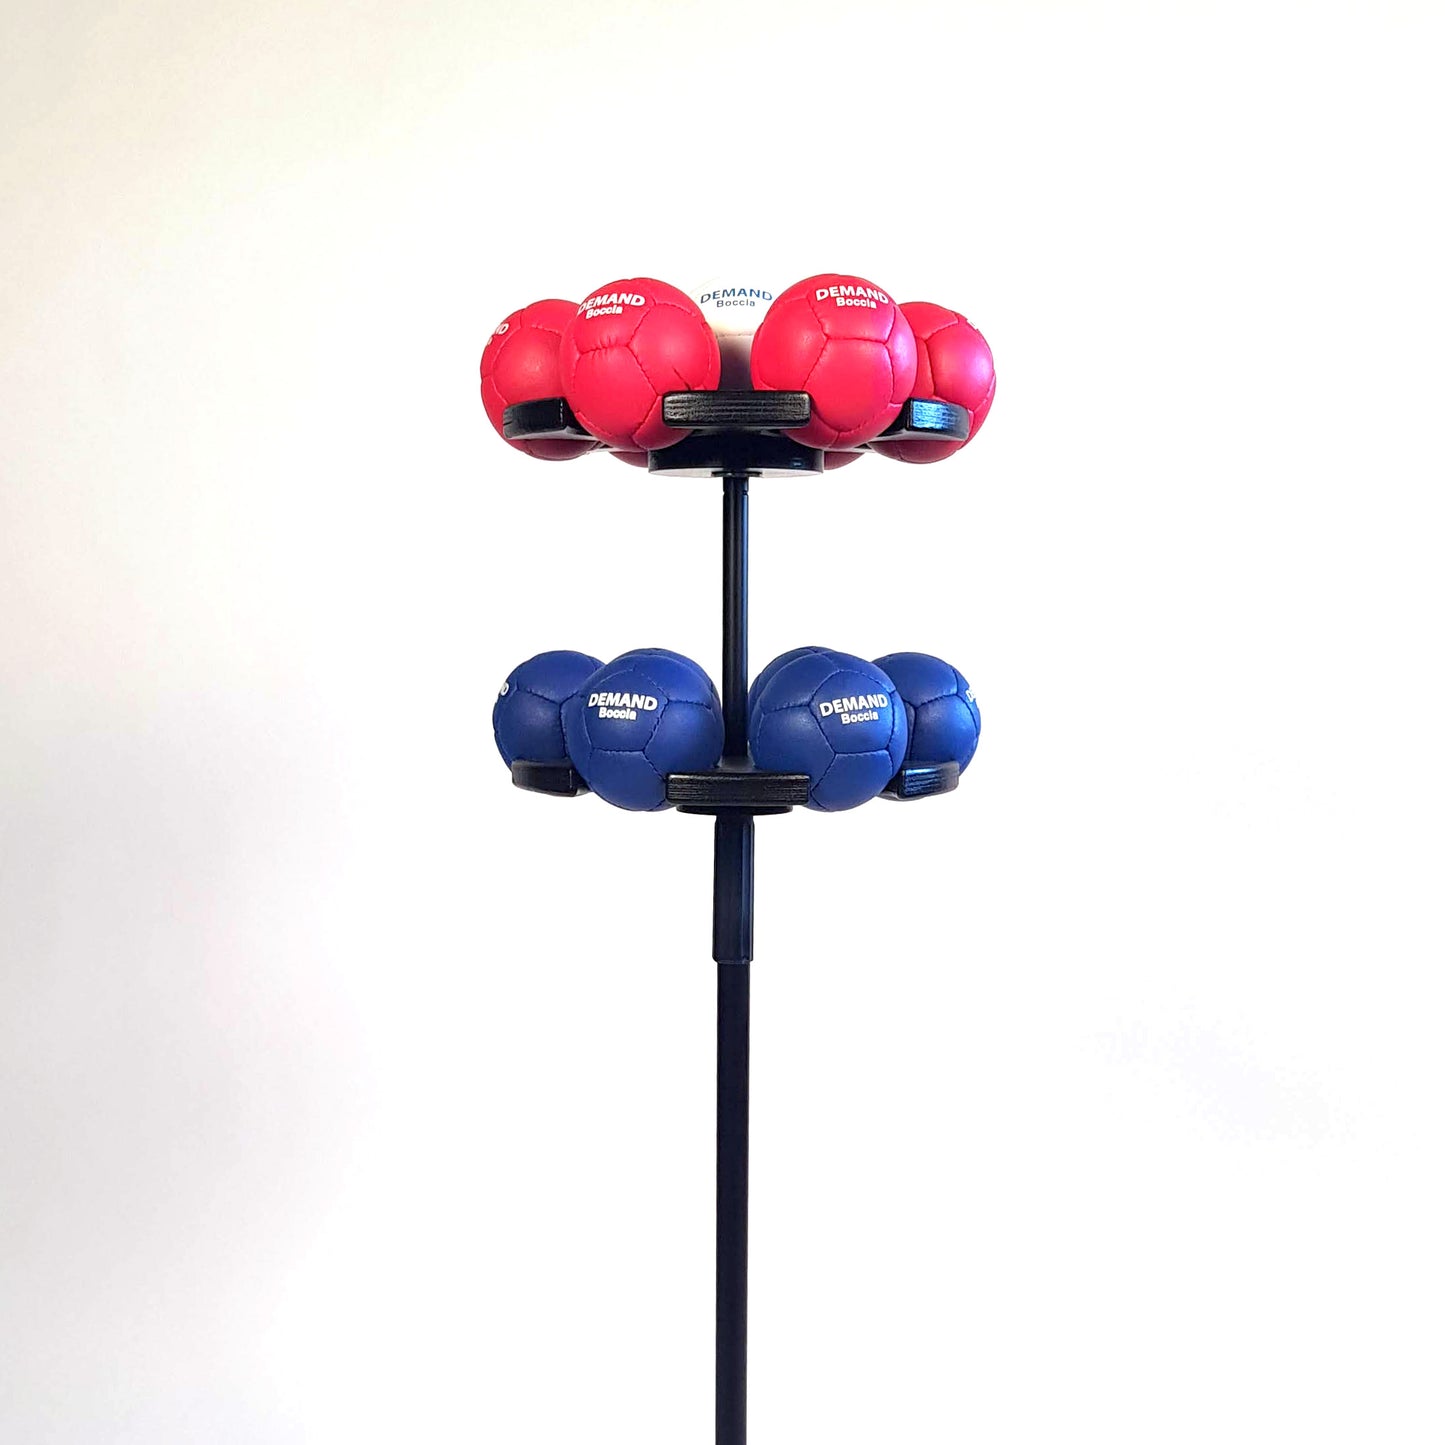 Close up side view of boccia ball stand with 13 balls at low height setting